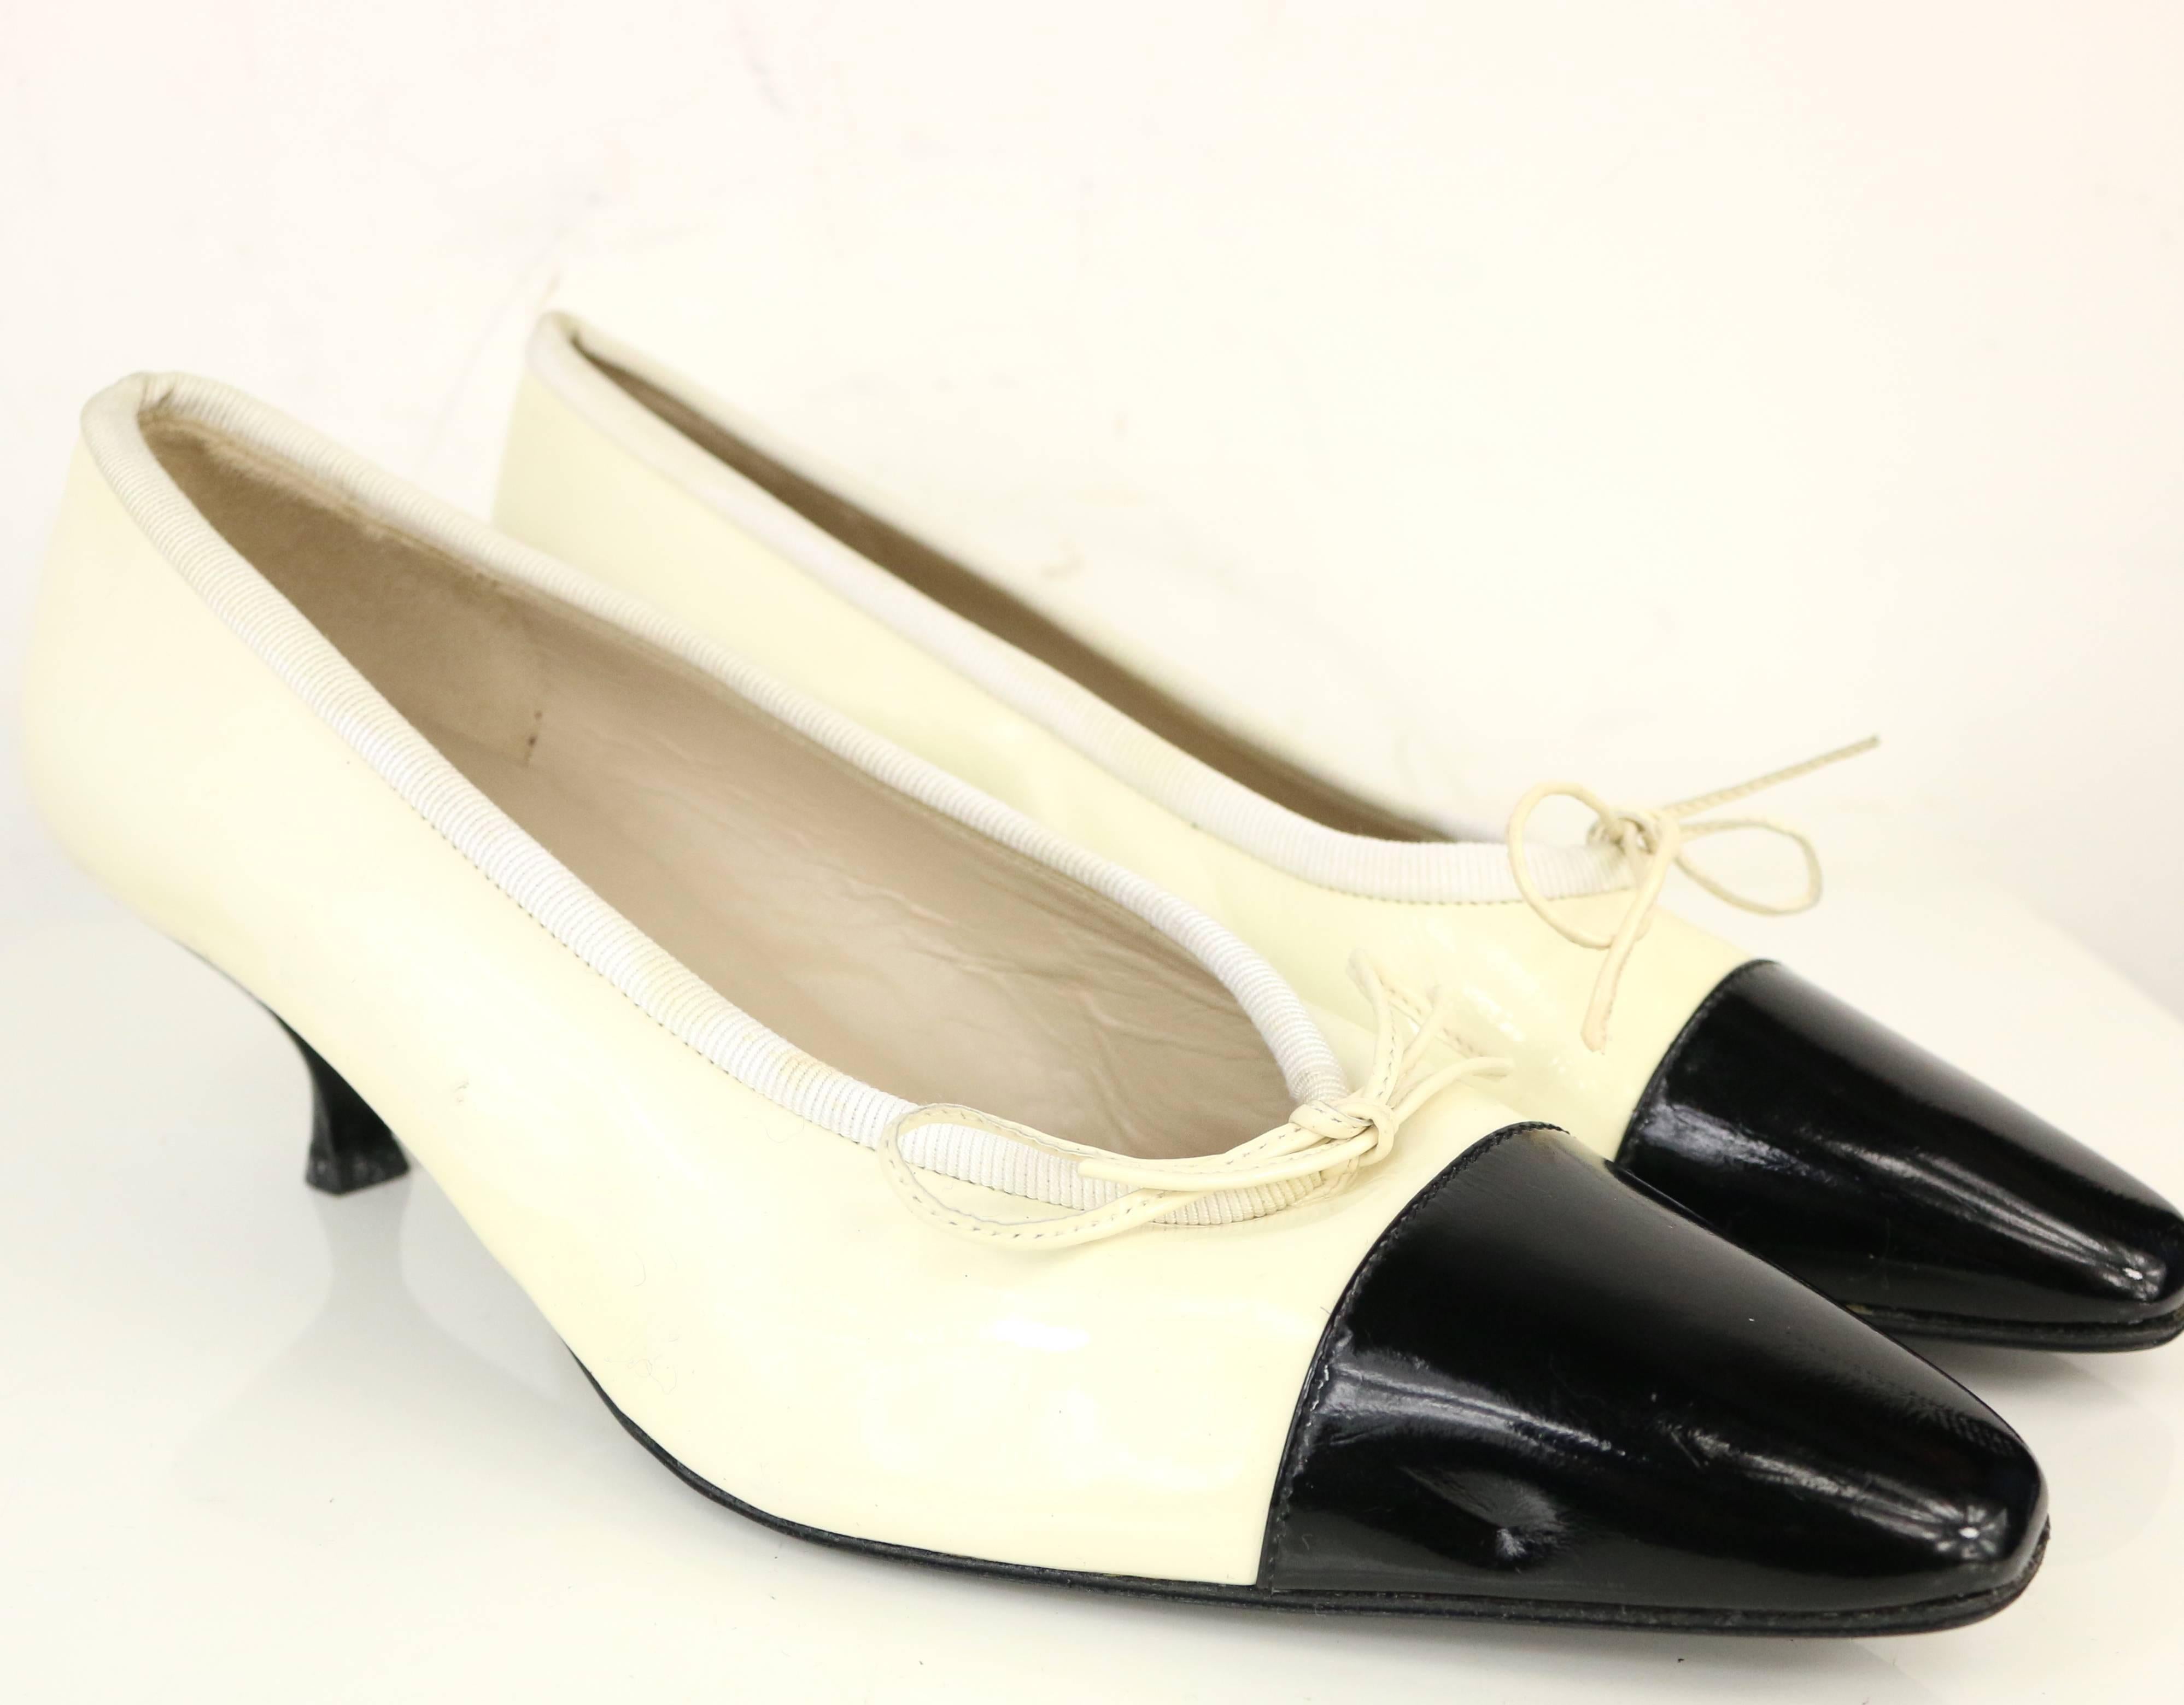 - Vintage 90s Chanel bi-toned black and white patent leather shoes. 

- Featuring a tied ribbon in front and low heels. 

- SIze 38. 

- Condition: Good. Although it has never been worn before, after all these years, it has been slightly discolored